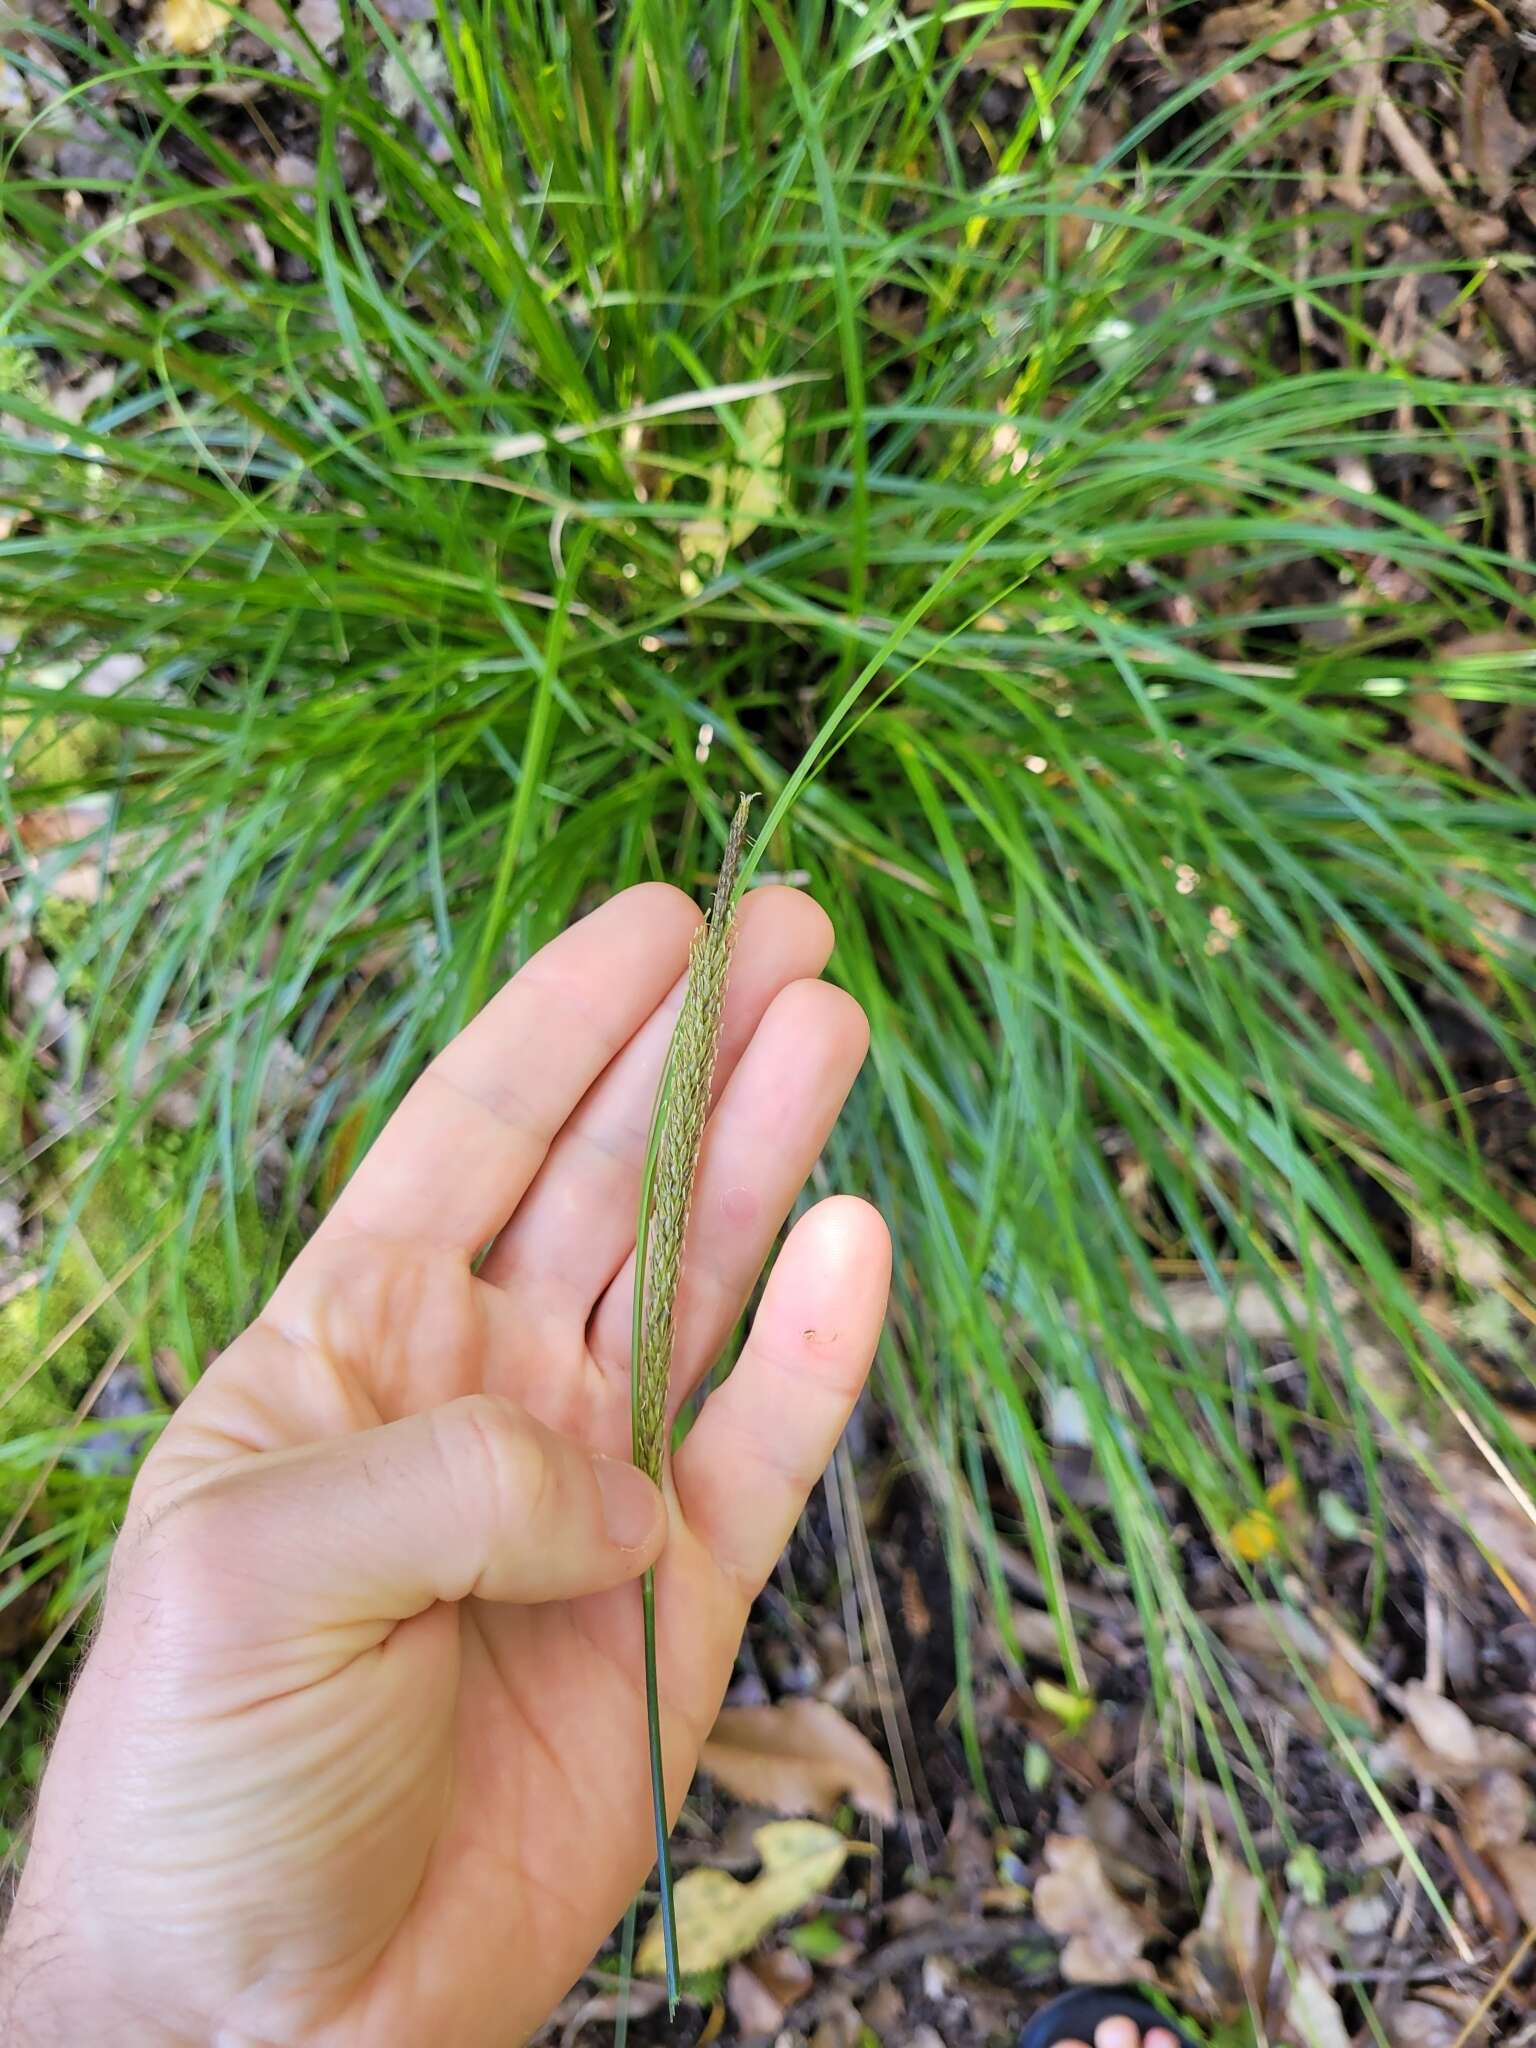 Image of Carex corynoidea K. A. Ford